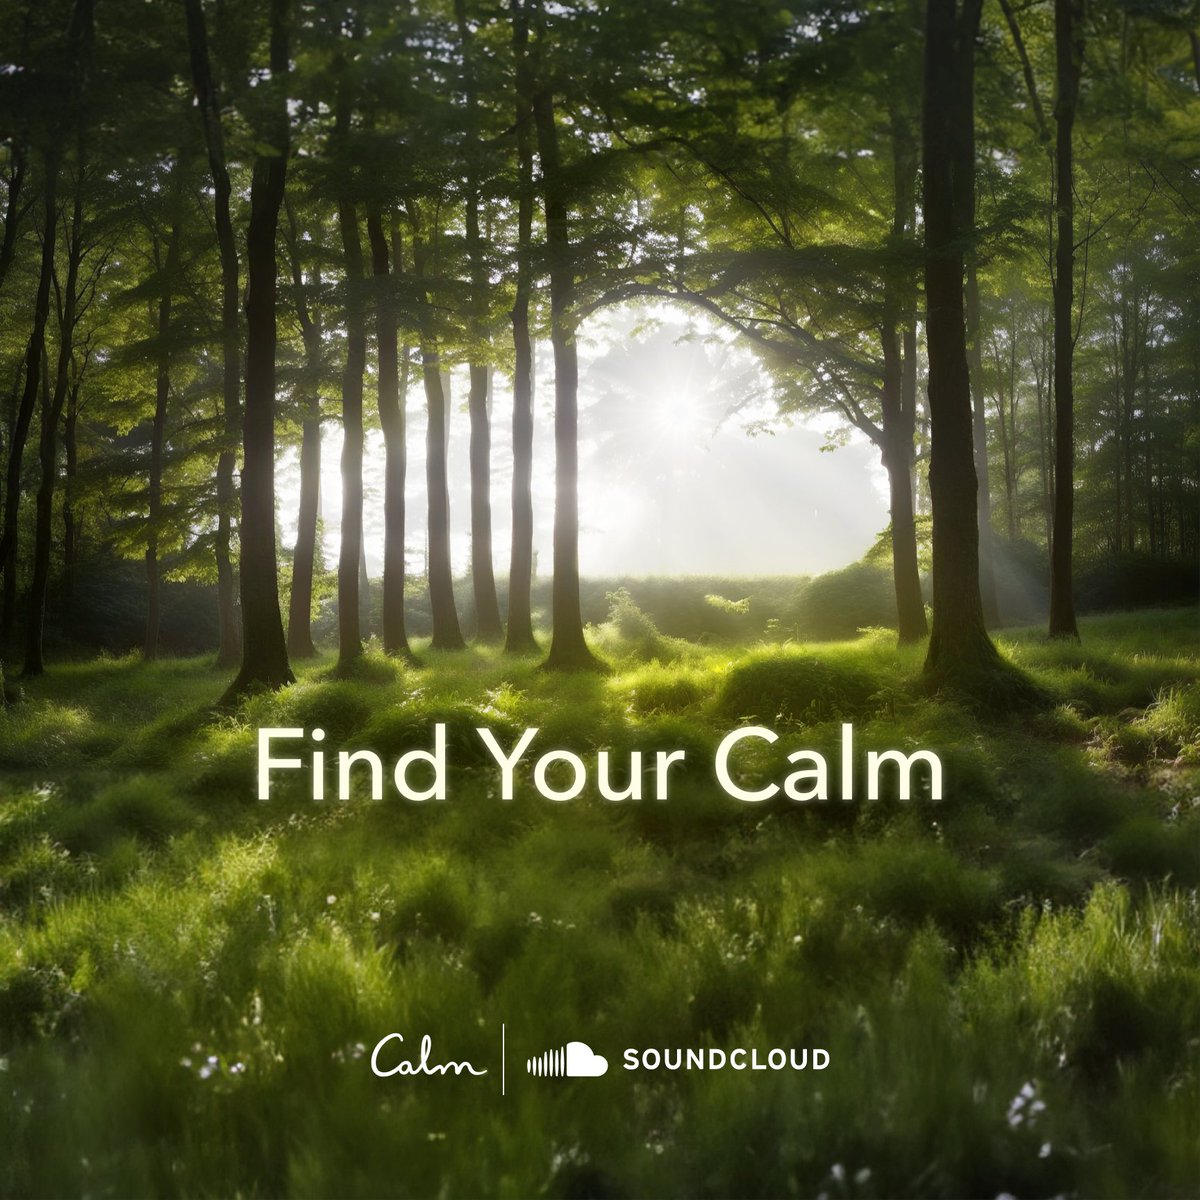 Stress is never good for creativity 🙇 We're excited to introduce @calm as part of our Next Pro benefits to help you stress less, live better, and find your calm. 🔗 Learn more: community.soundcloud.com/playbook-artic…